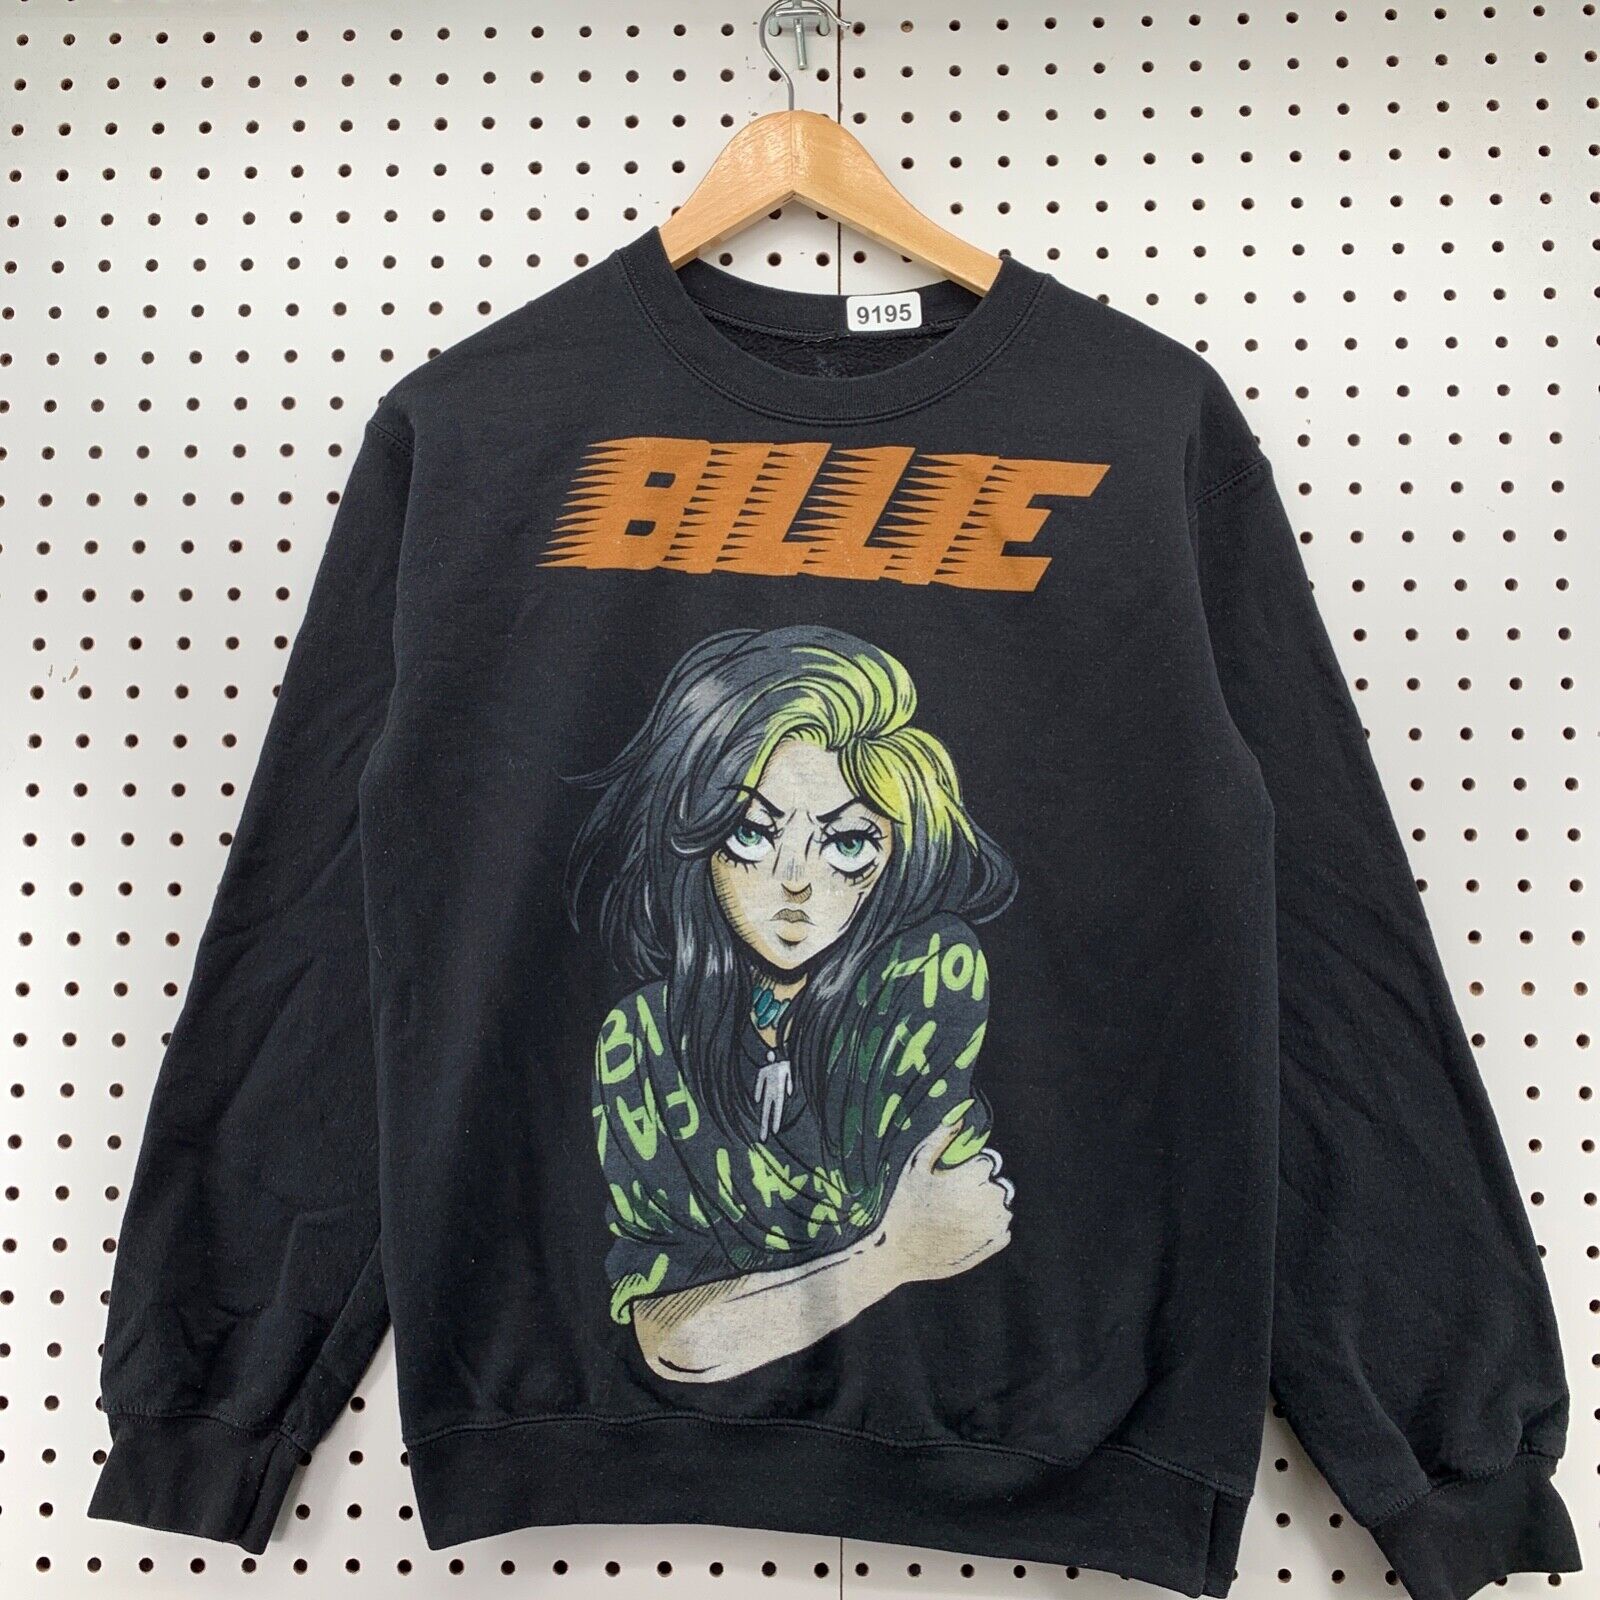 cookie on Twitter saw these and thought they were cute   billie eilish  anime pfps from pinterest anime billie billieeilish aesthetic  httpstcoEW3IoTf7bh  Twitter